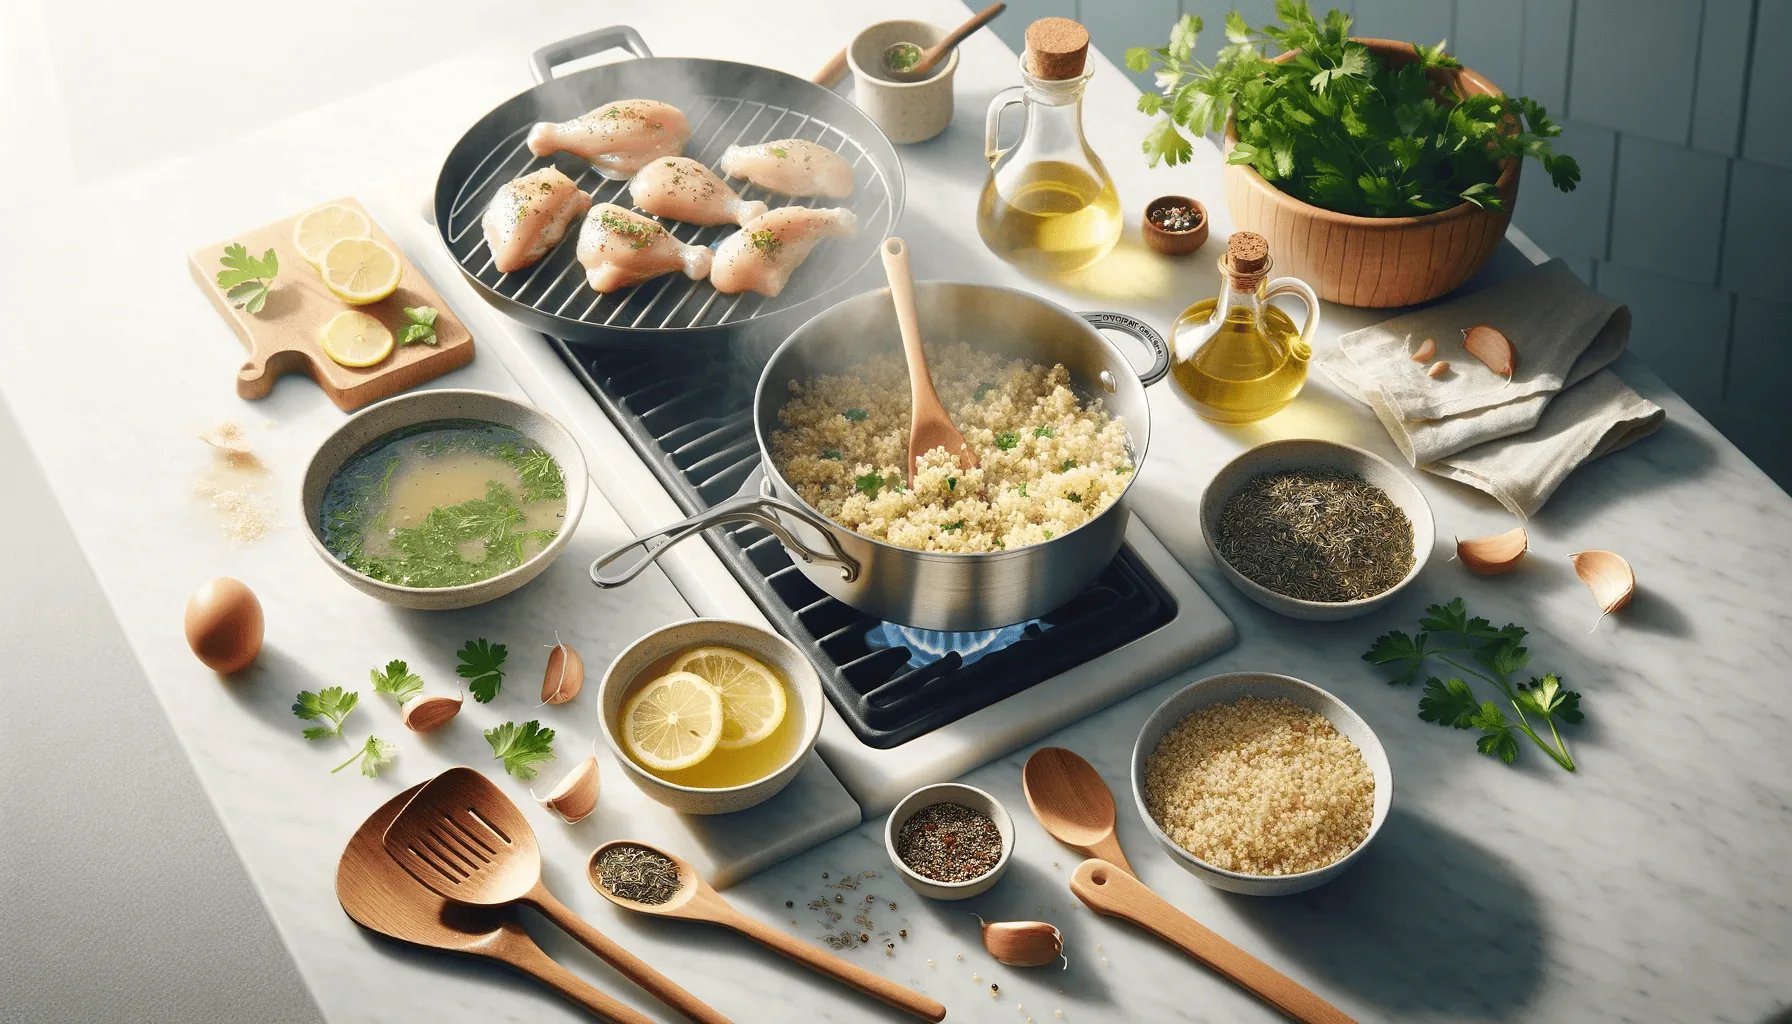 Mid-cooking scene, with quinoa simmering in a saucepan, a bowl of lemon herb dressing, marinating chicken, wooden utensils, and a heating grill pan.